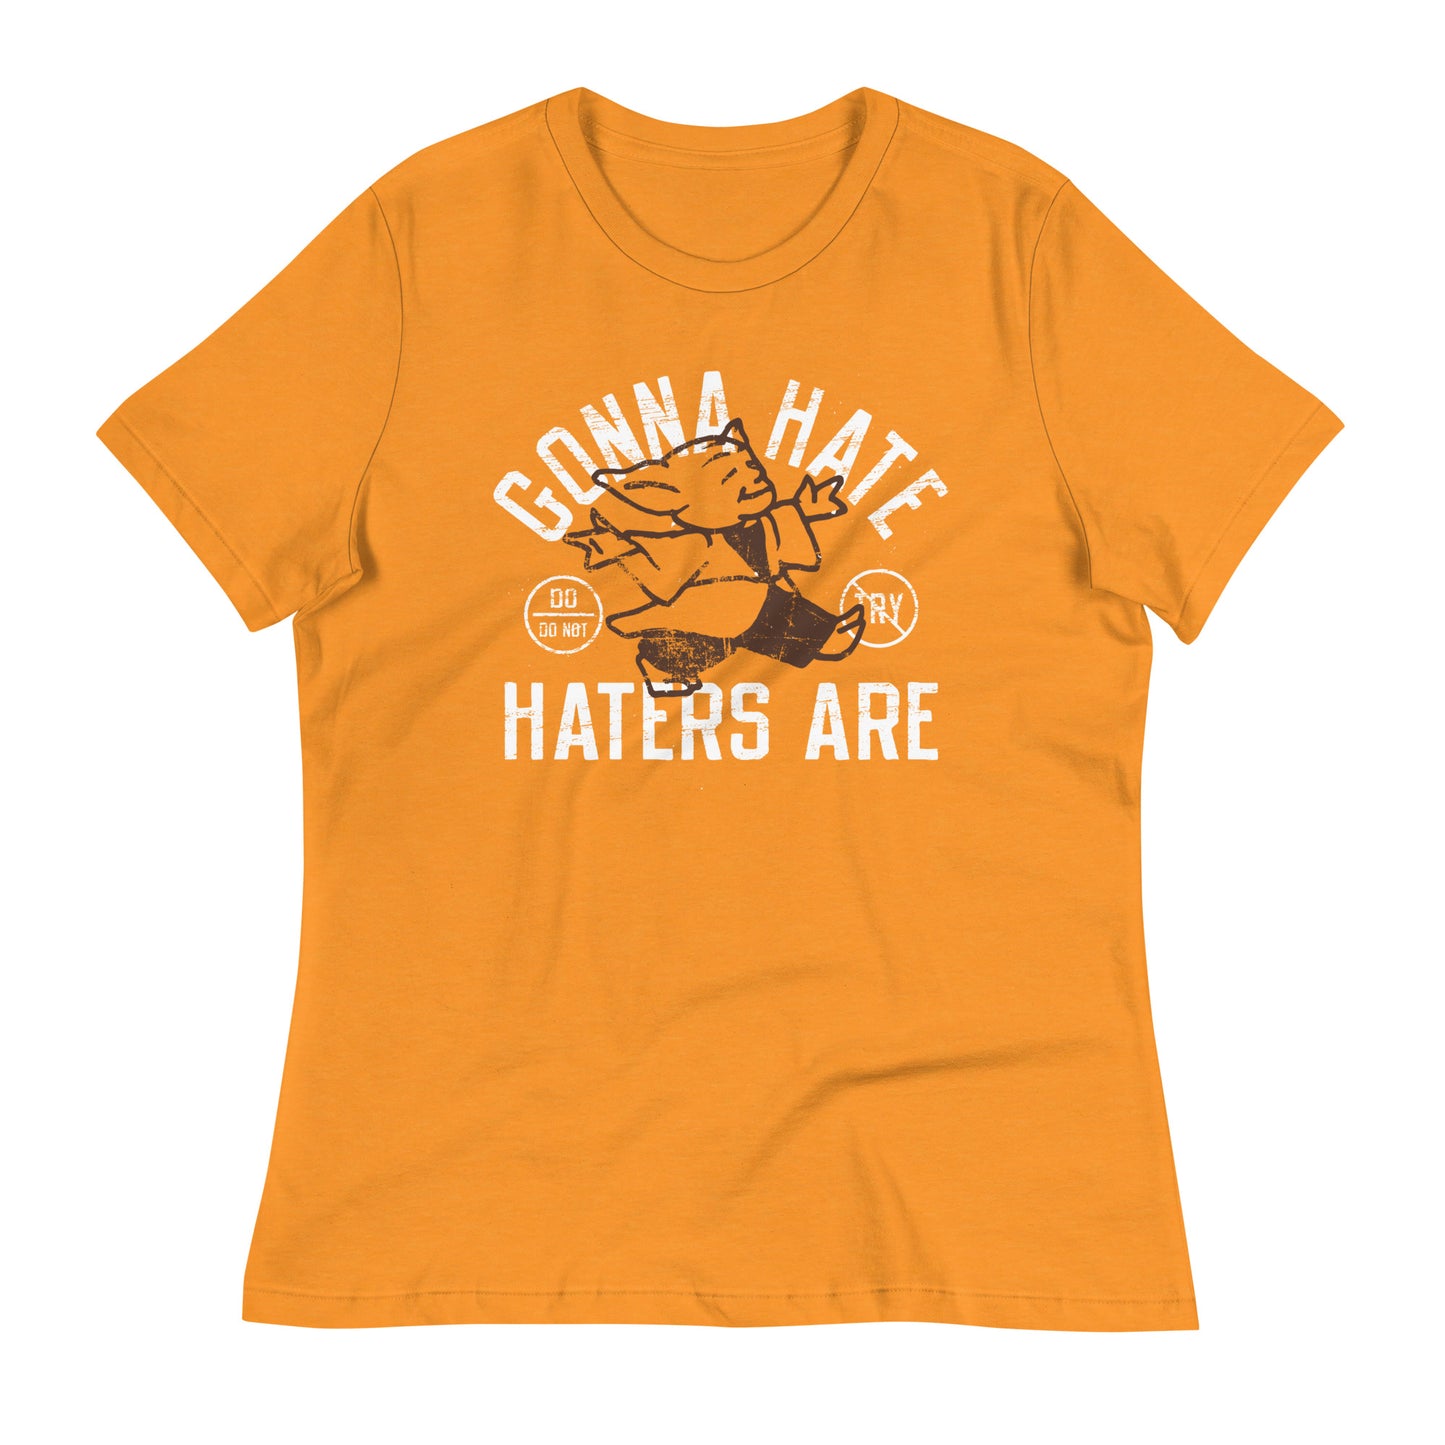 Gonna Hate Haters Are Women's Signature Tee